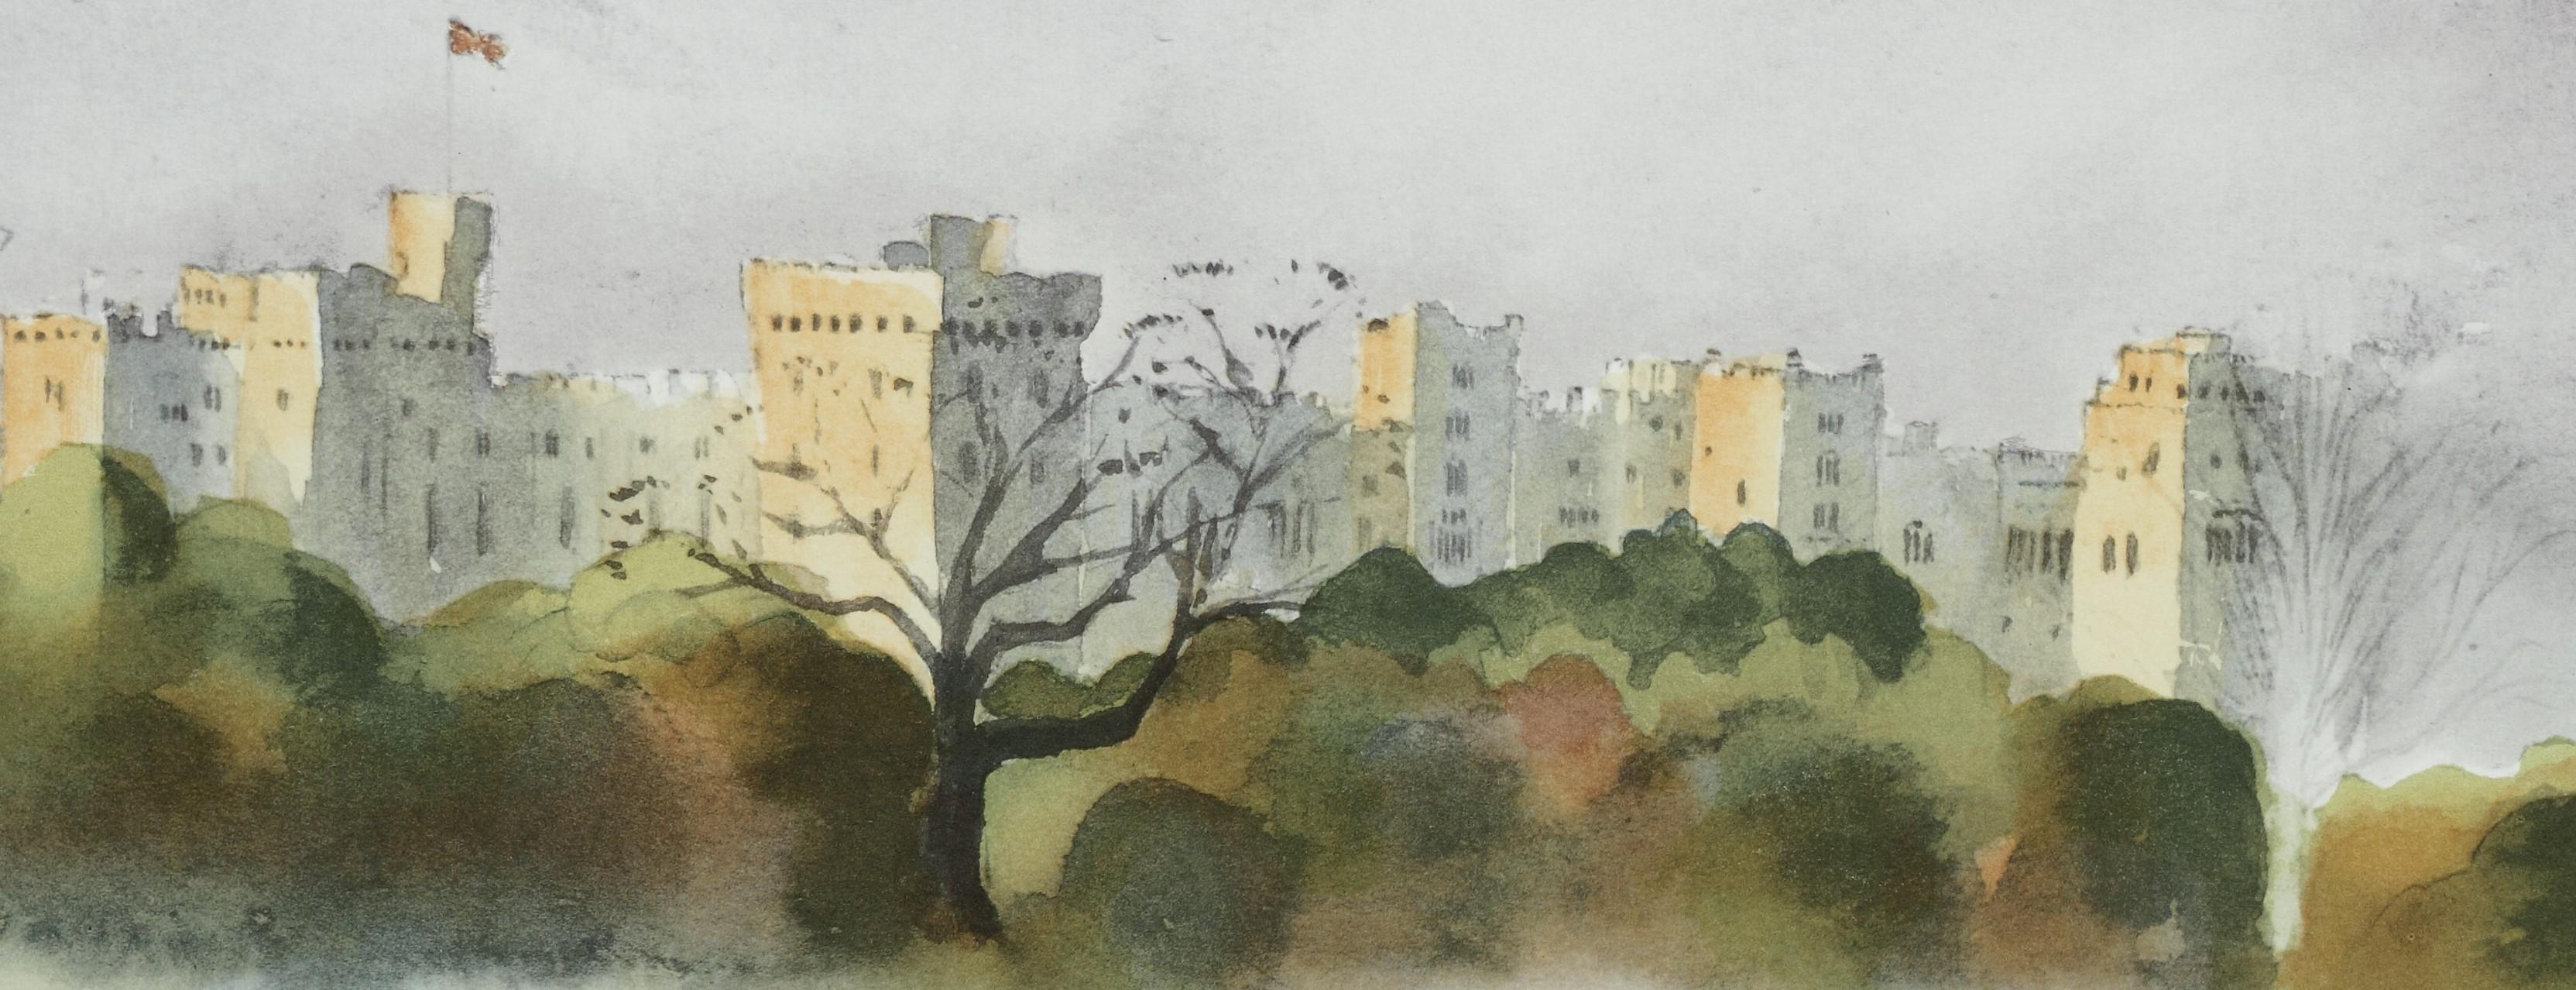 Windsor Castle - Signierte Lithographie, Royal Art, Royal Art, Royal Homes,Windsor Castle, Britisch (Akademisch), Print, von His Majesty King Charles III